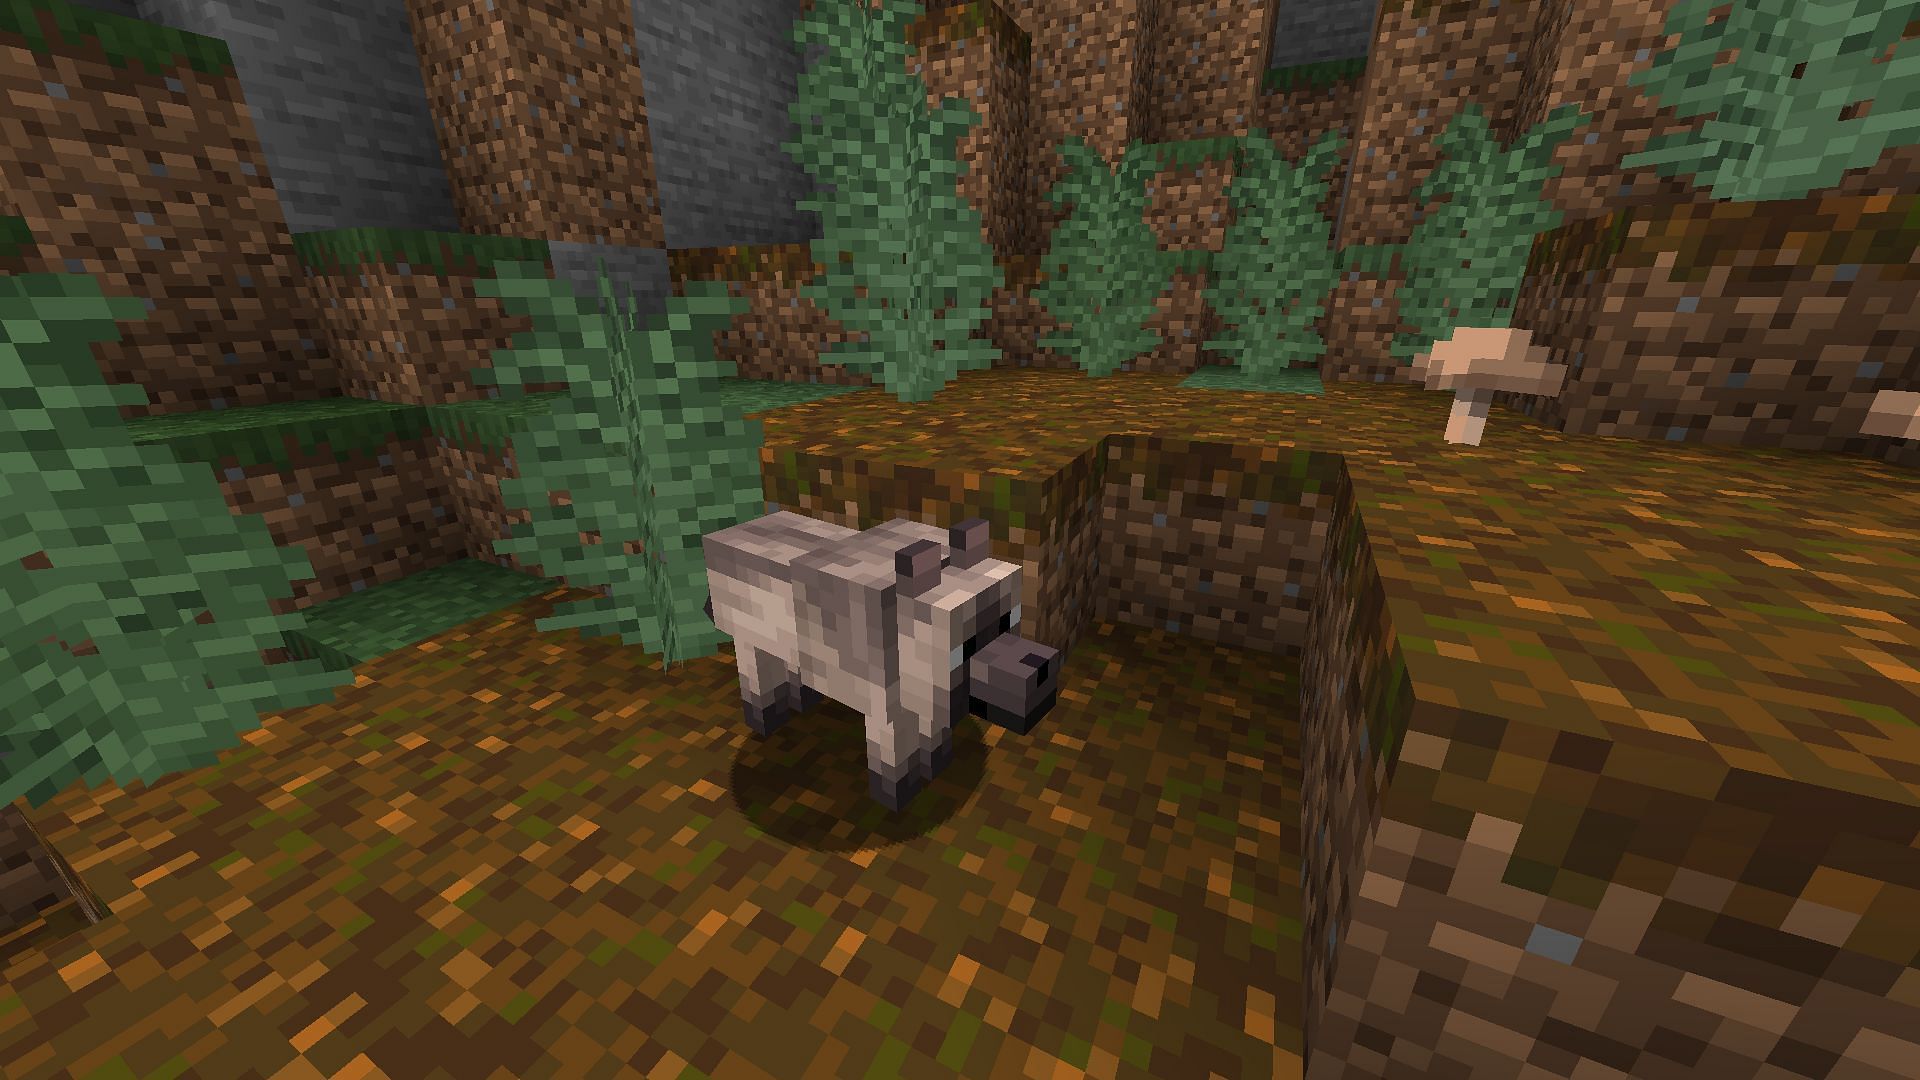 Players can find the chestnut wolf near spawn in this seed (Image via Mojang Studios)